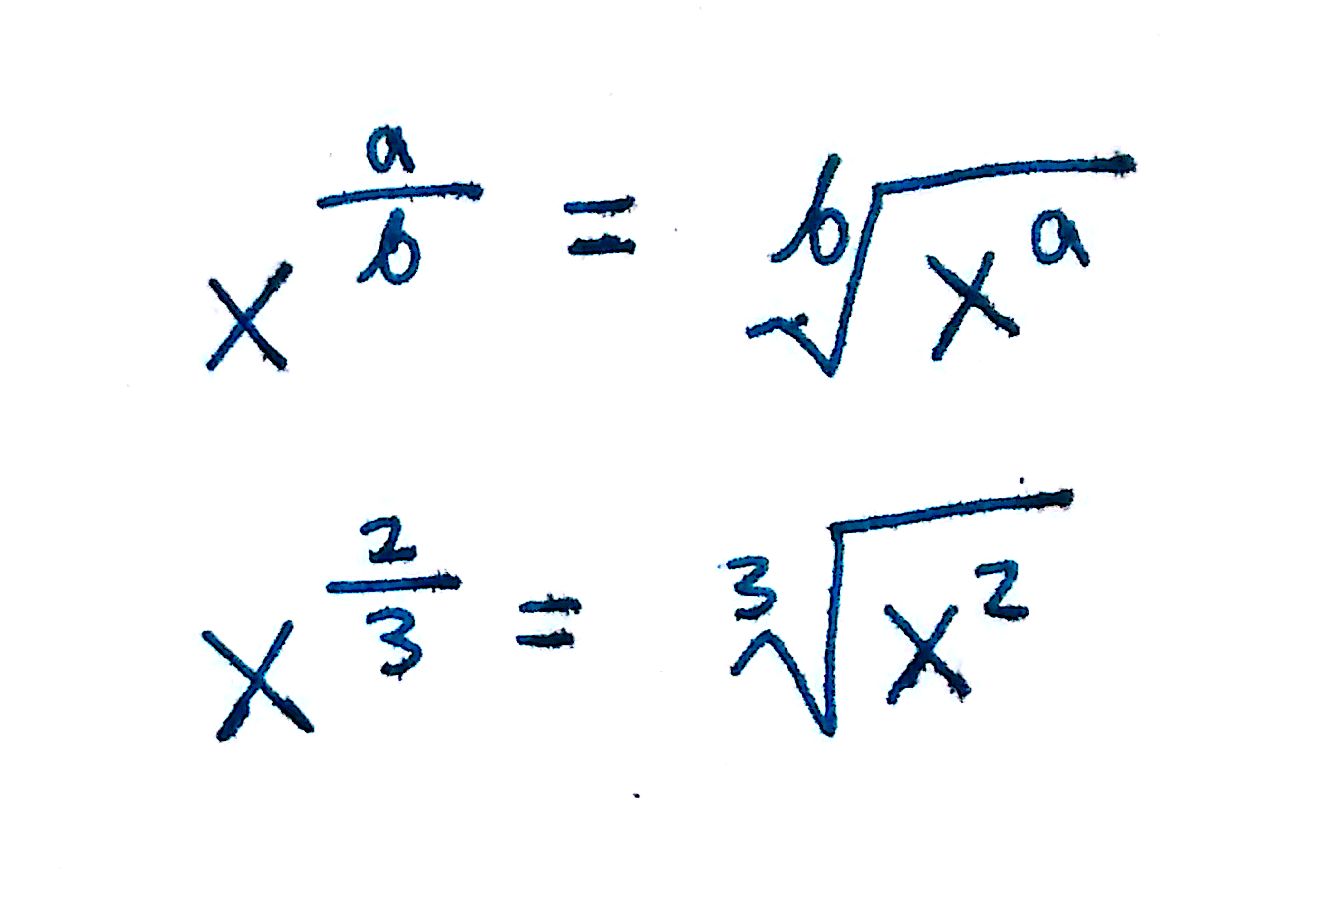 Fractional Exponents